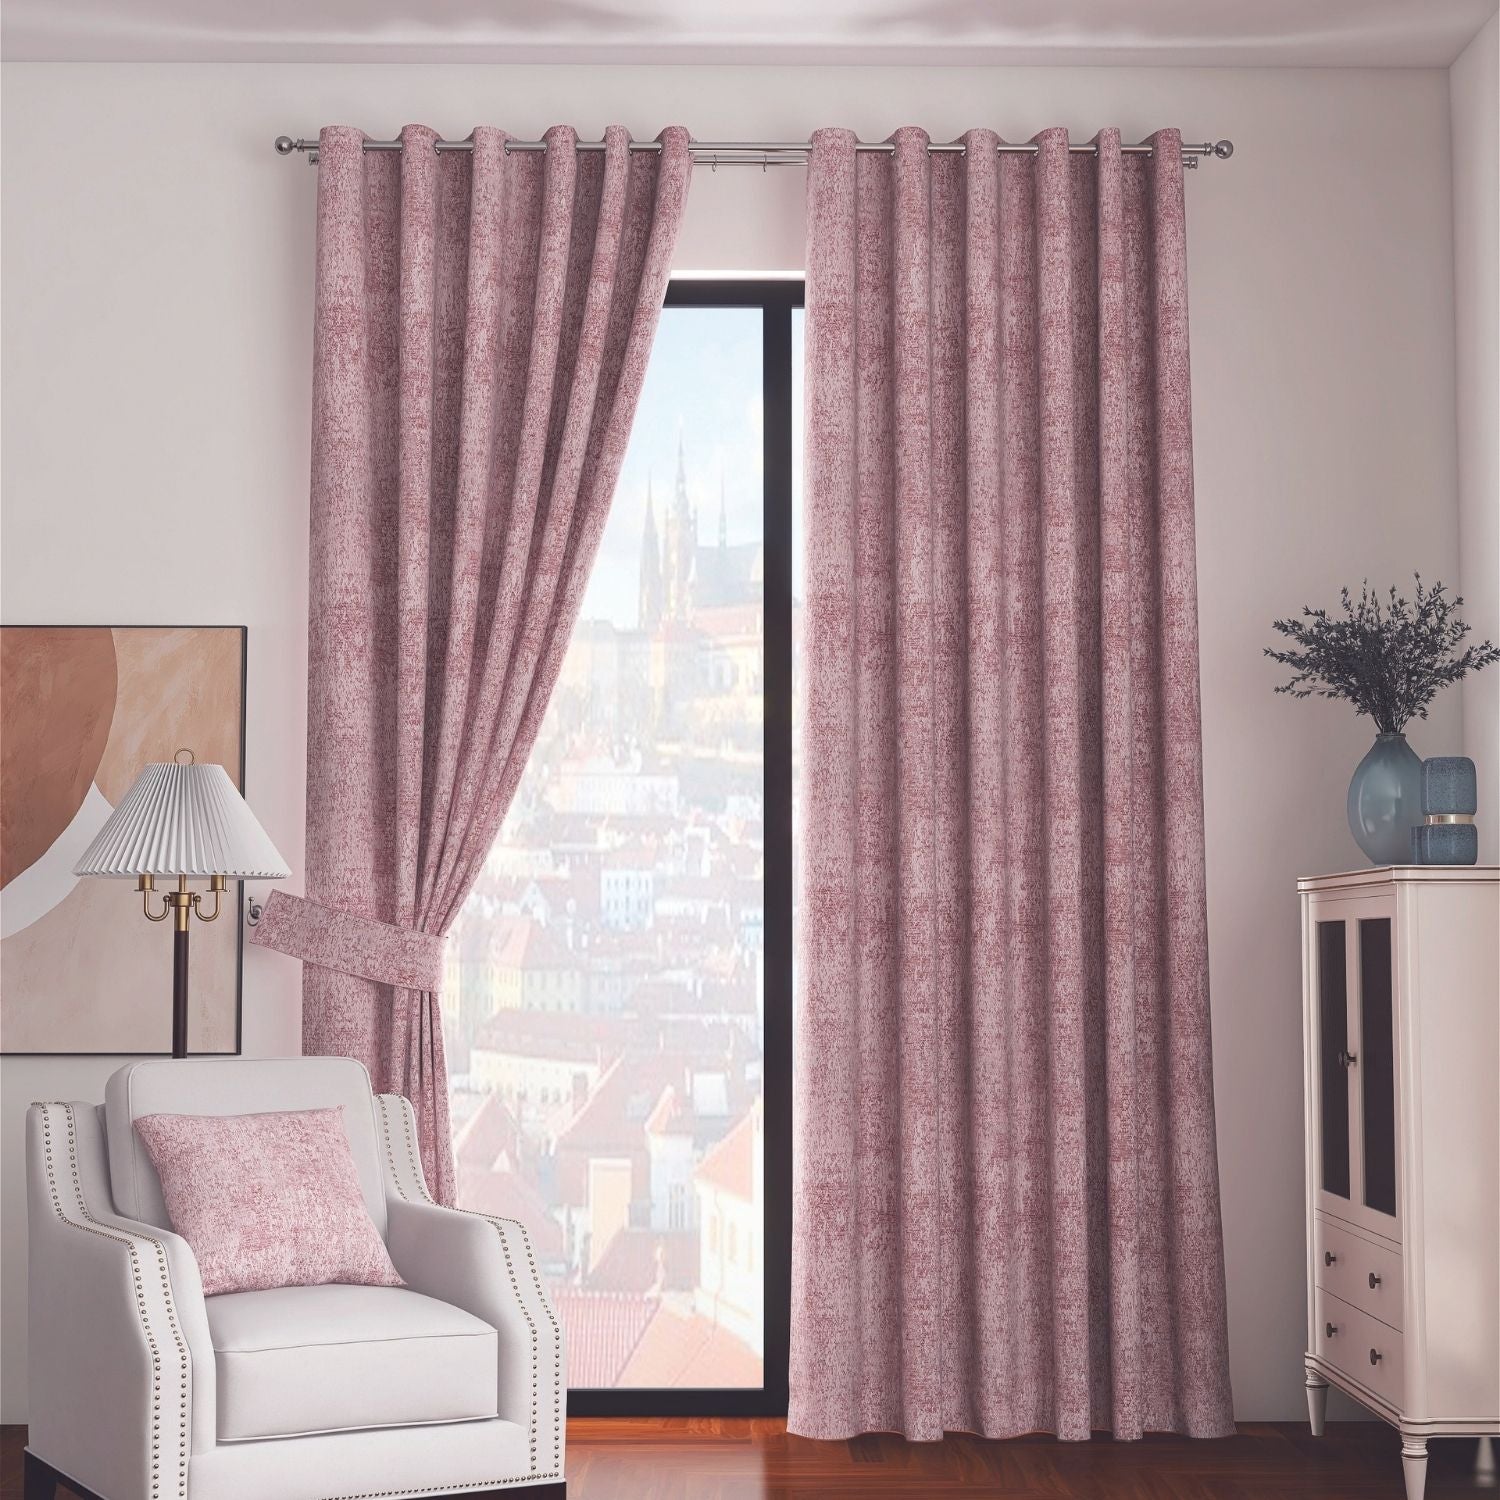 The Home Living Room Fiesta Ring Top Curtains - Blossom 1 Shaws Department Stores